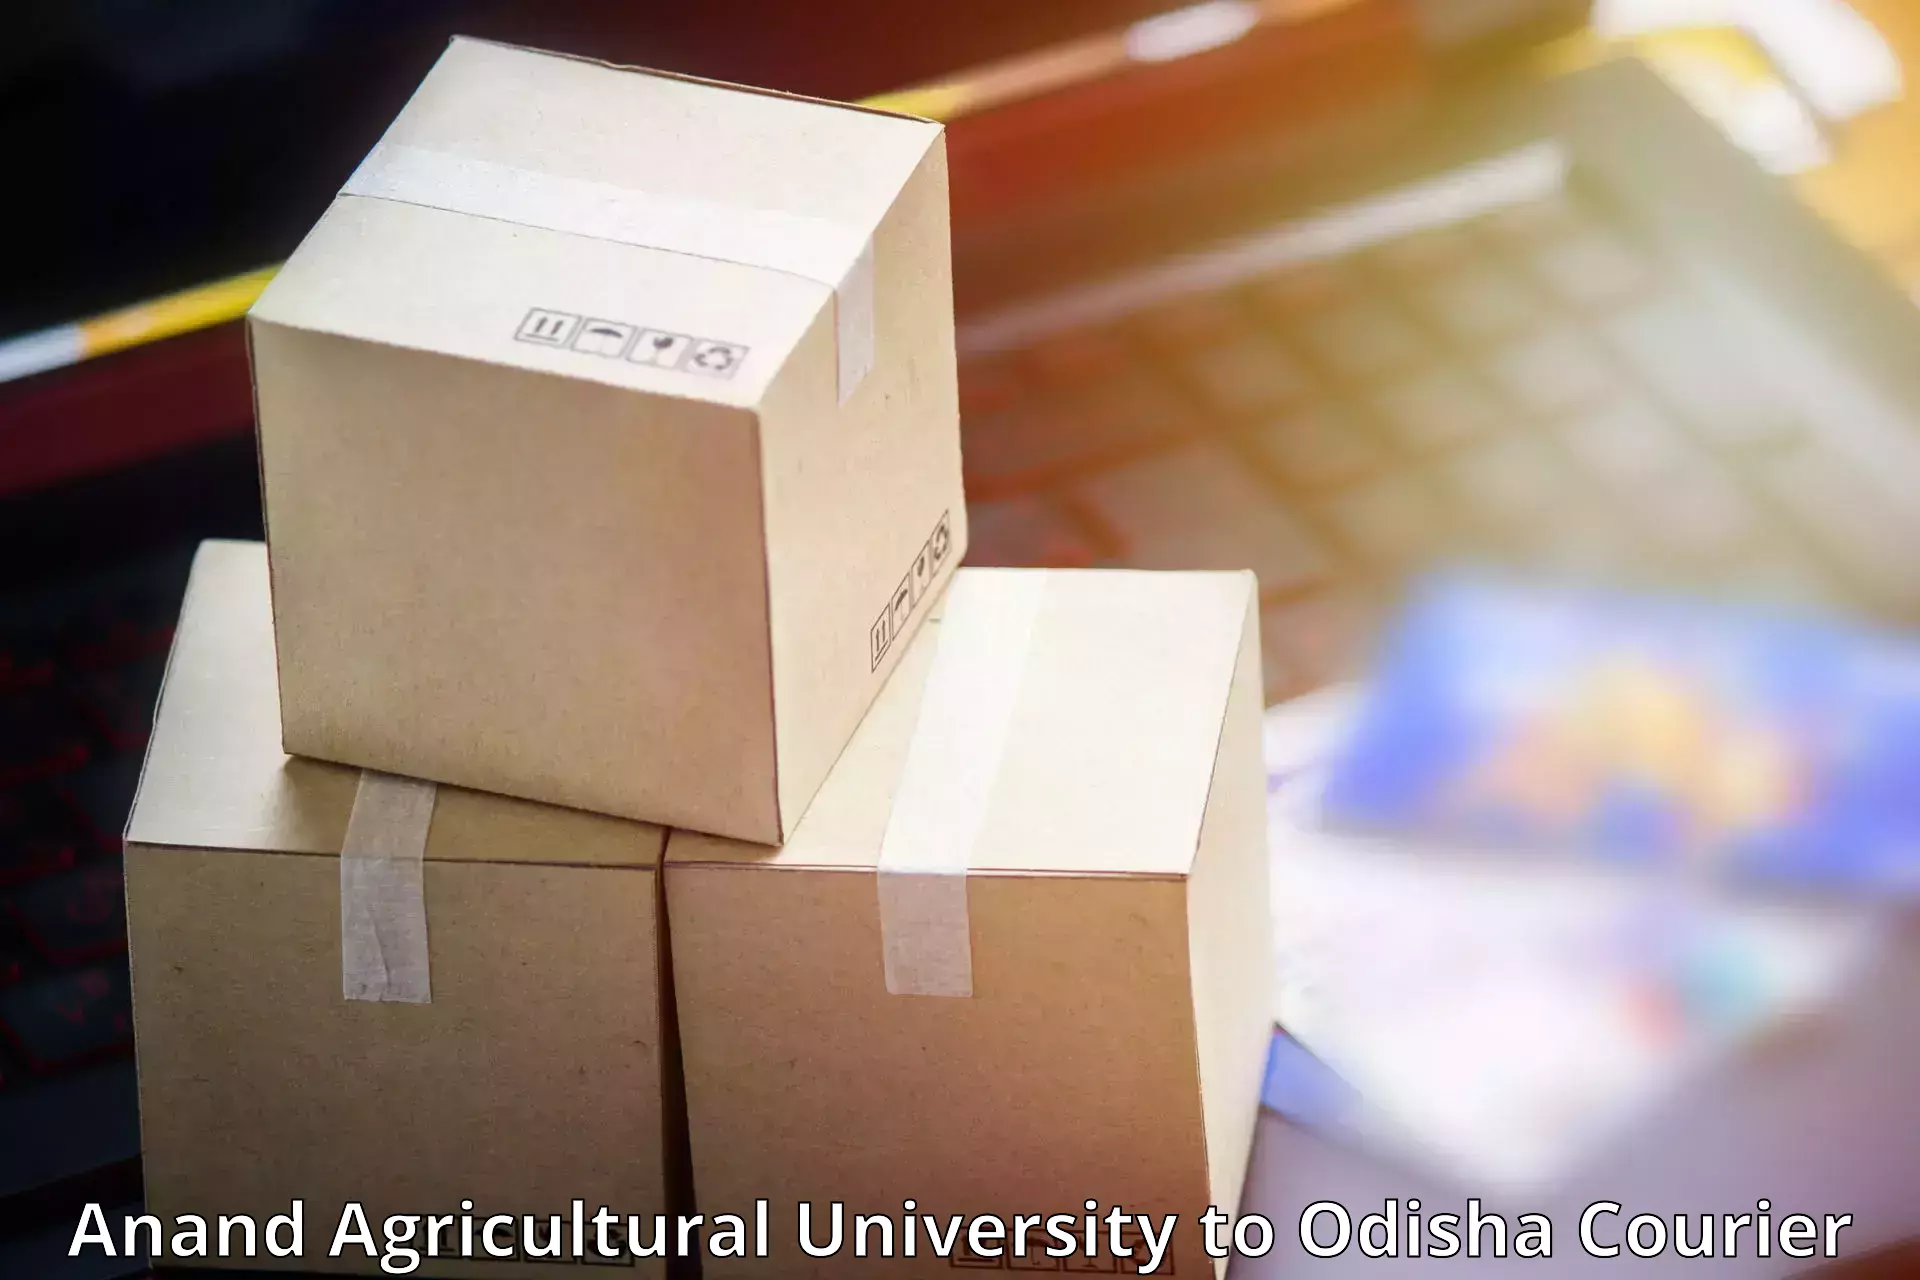 Efficient order fulfillment Anand Agricultural University to Tikiri